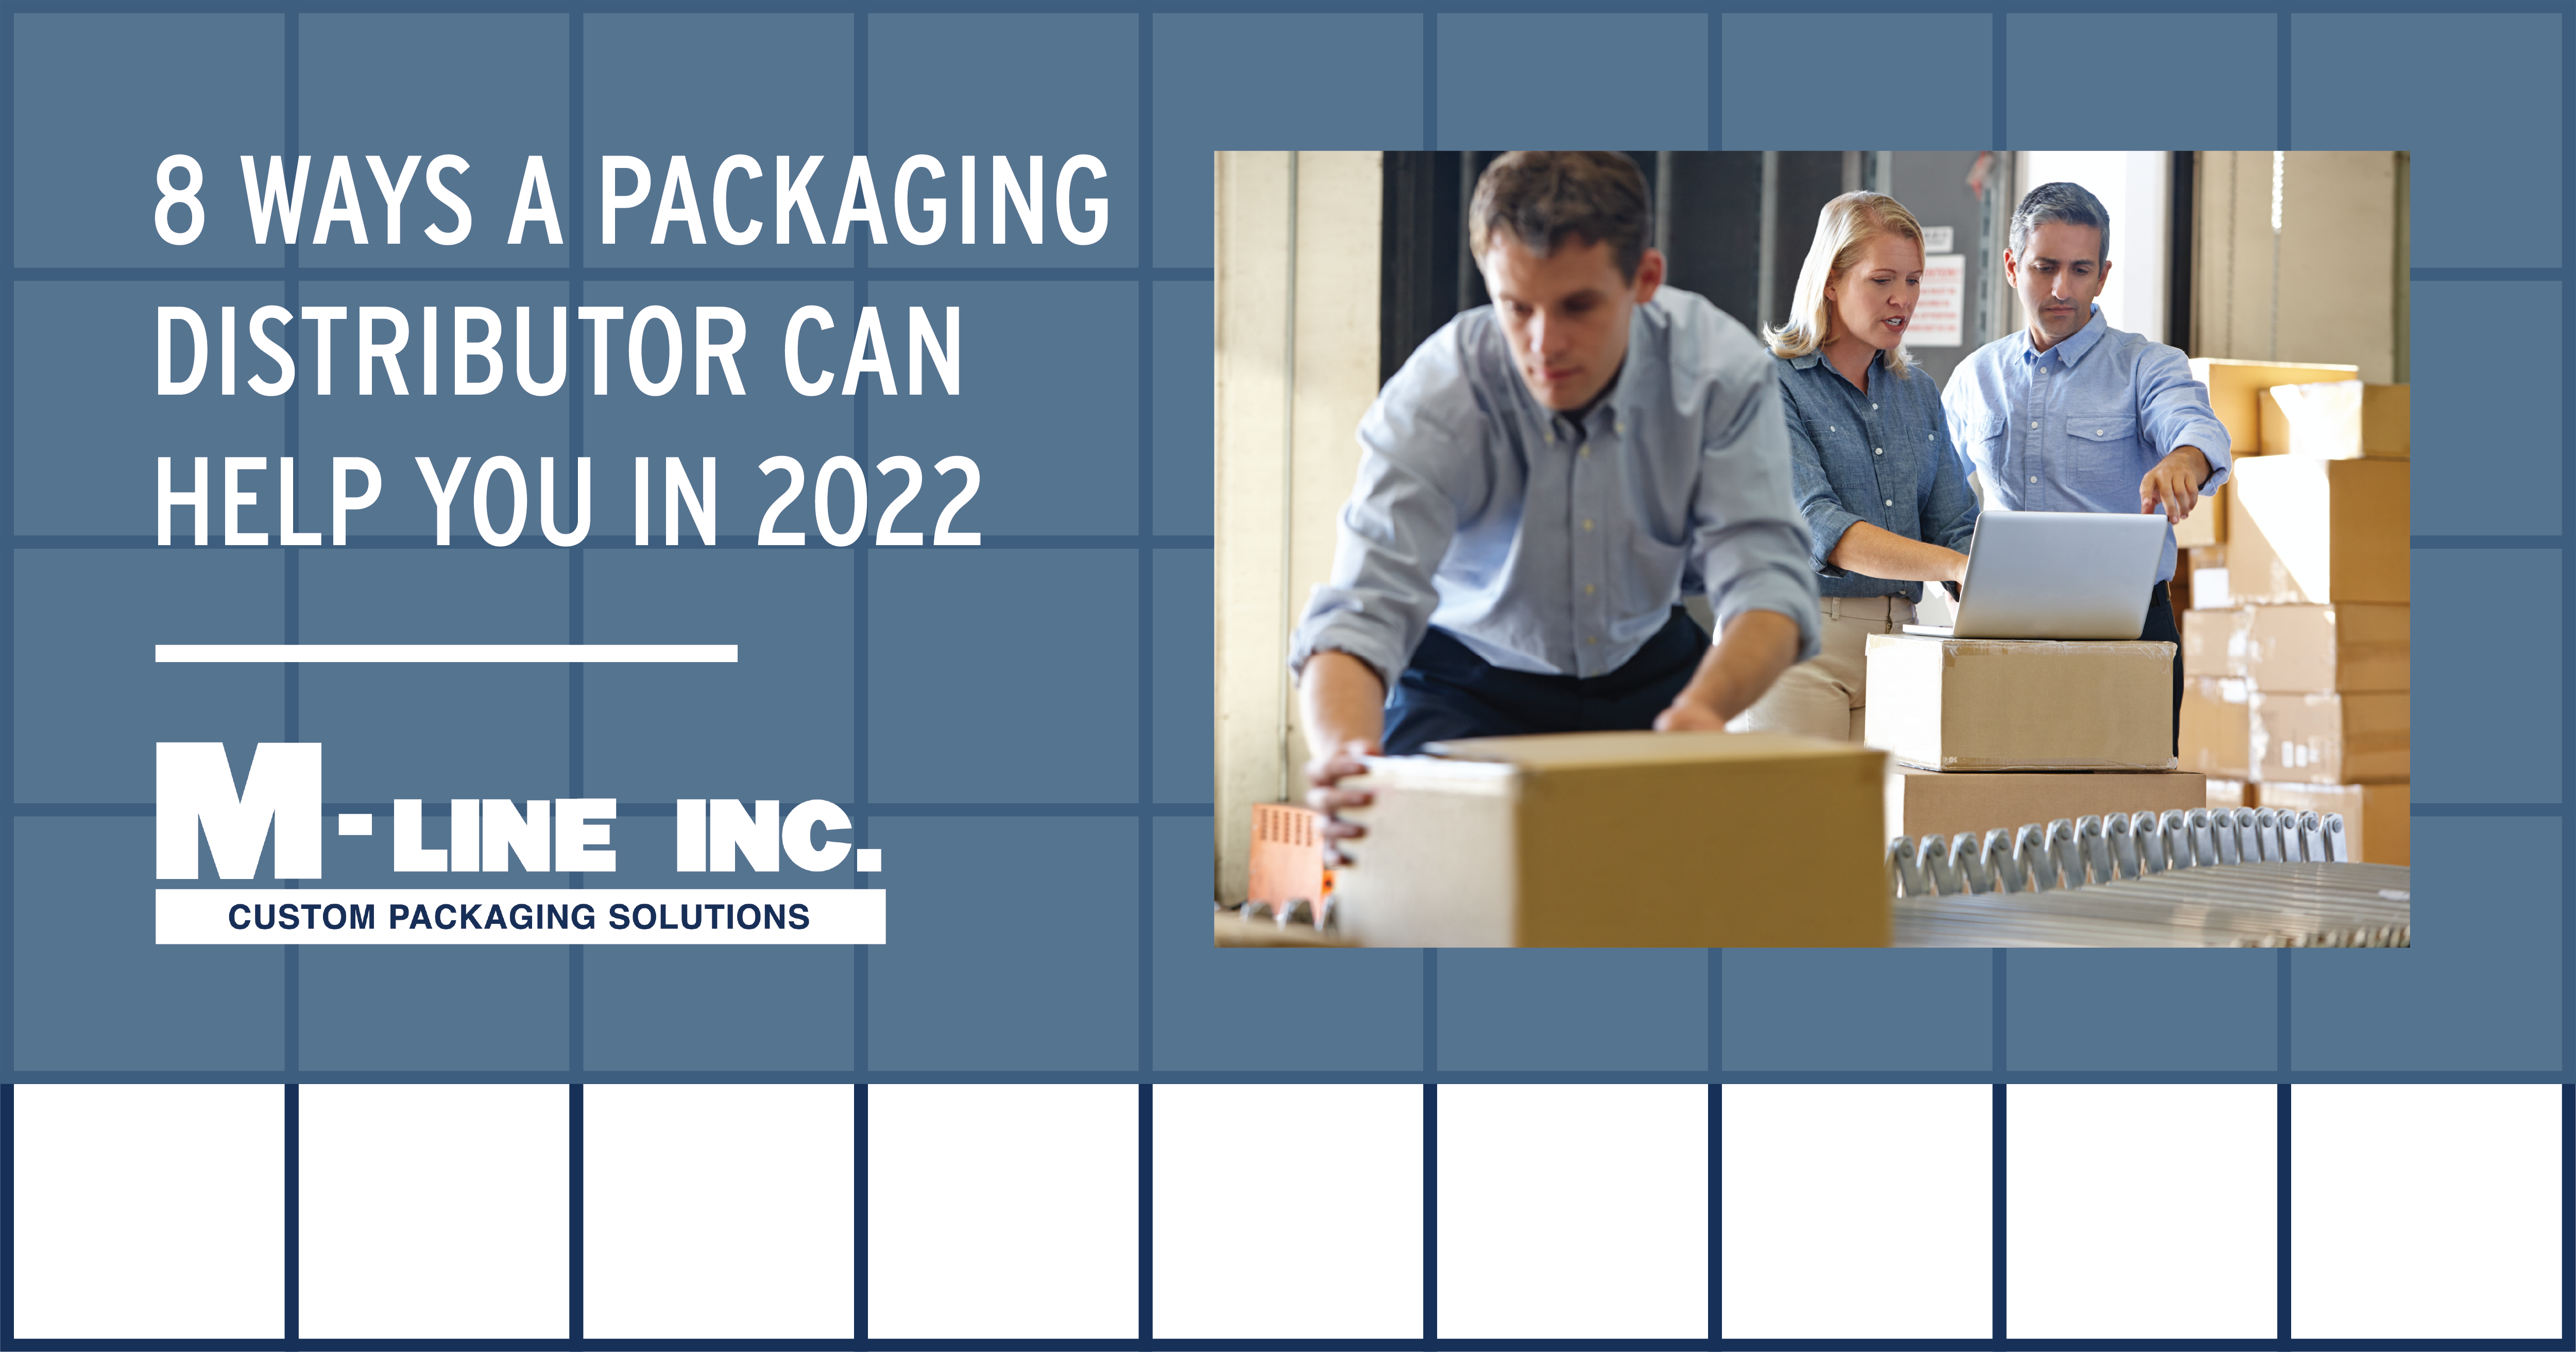 8 Ways a Packaging Distributor Can Help You in 2022